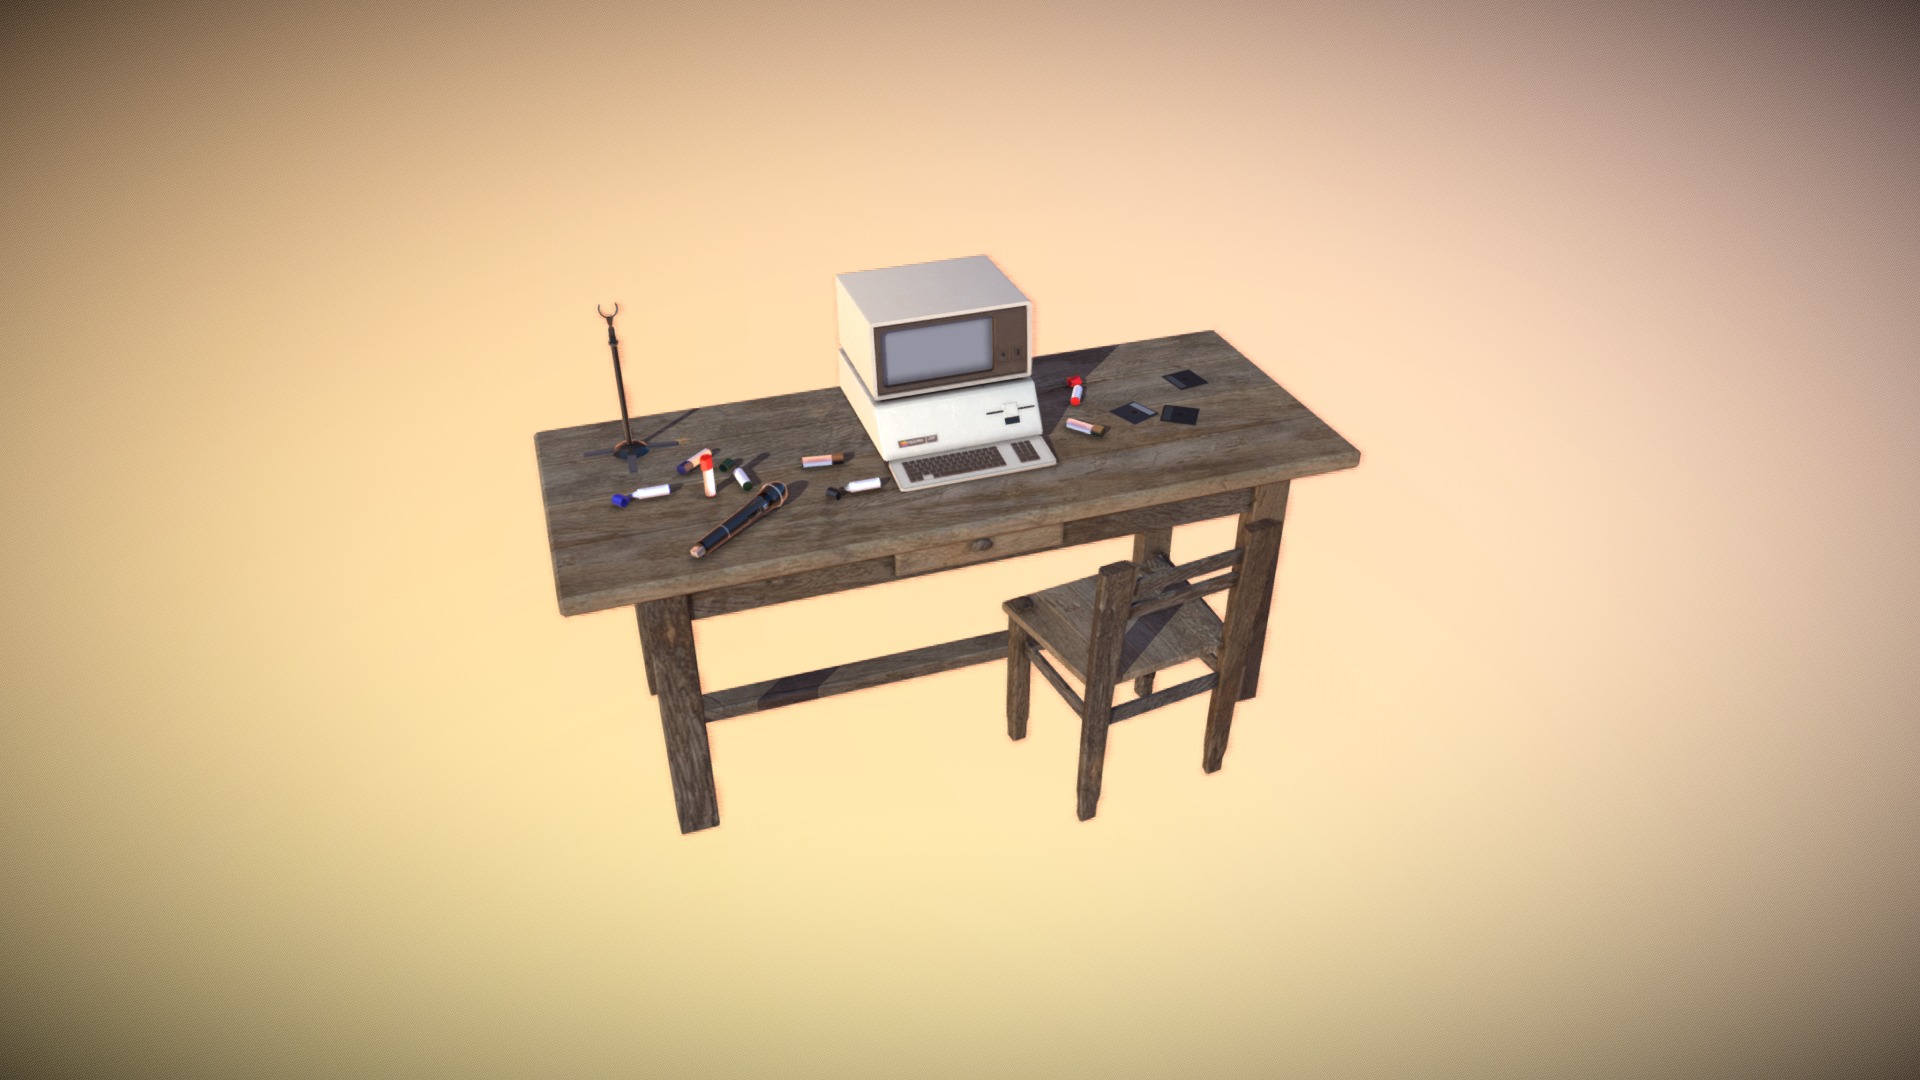 3D model Macintosh & bureau - This is a 3D model of the Macintosh & bureau. The 3D model is about a table with a computer on it.